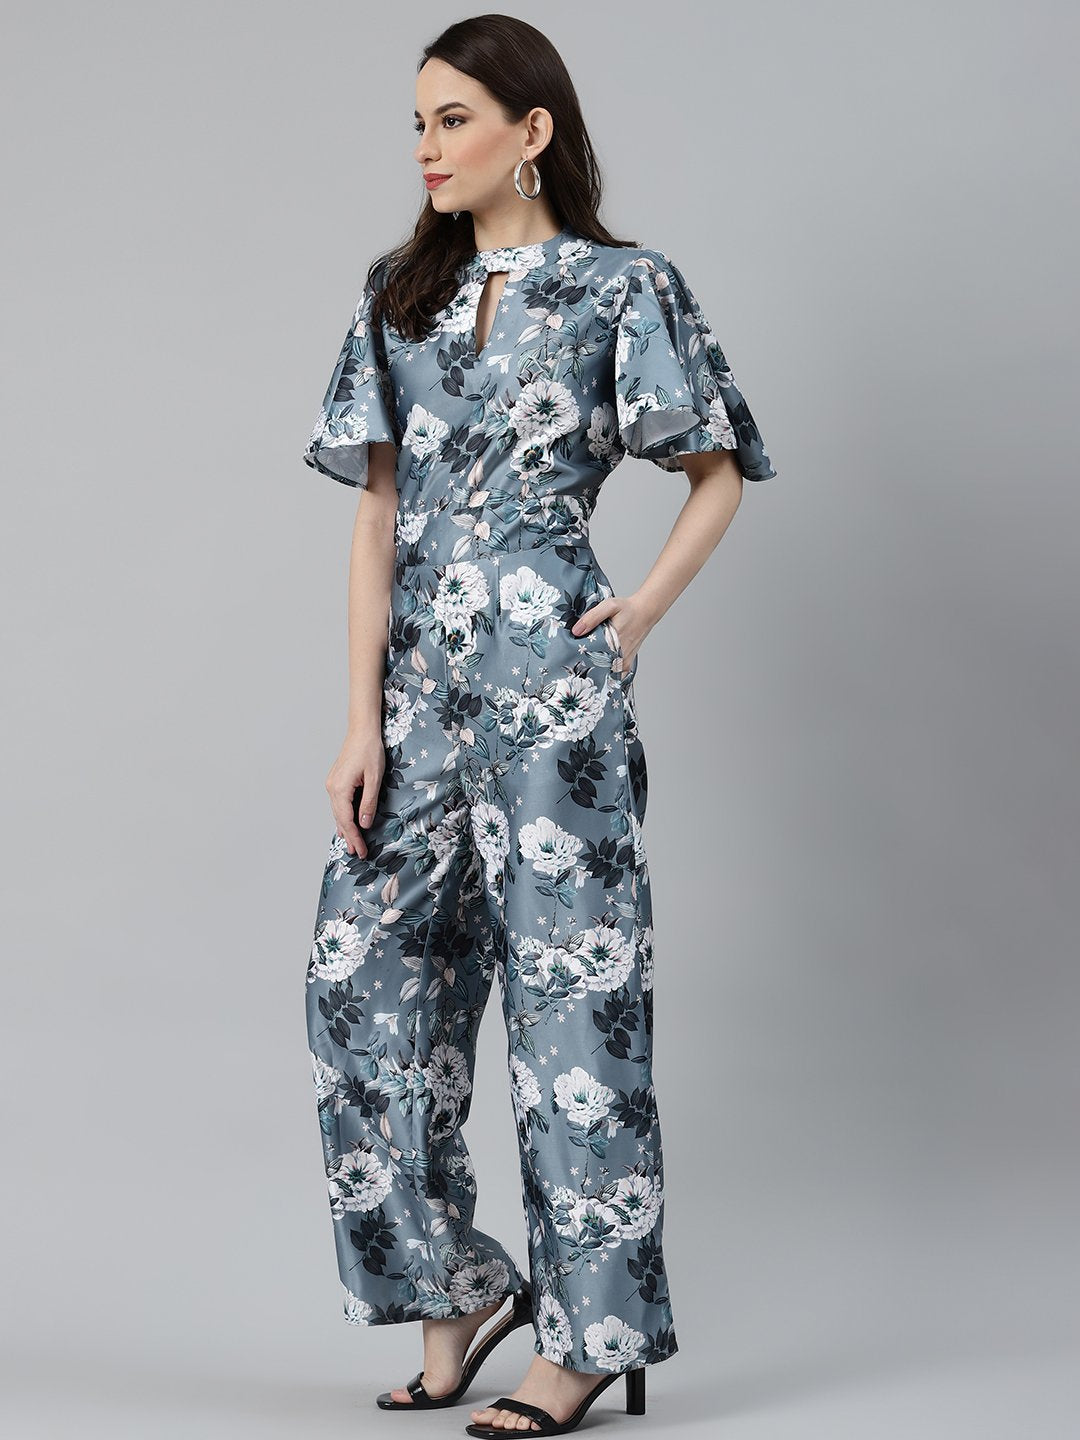 Women's Grey & Off-White Printed Keyhole Neck Flared Sleeves Basic Jumpsuit - Jompers